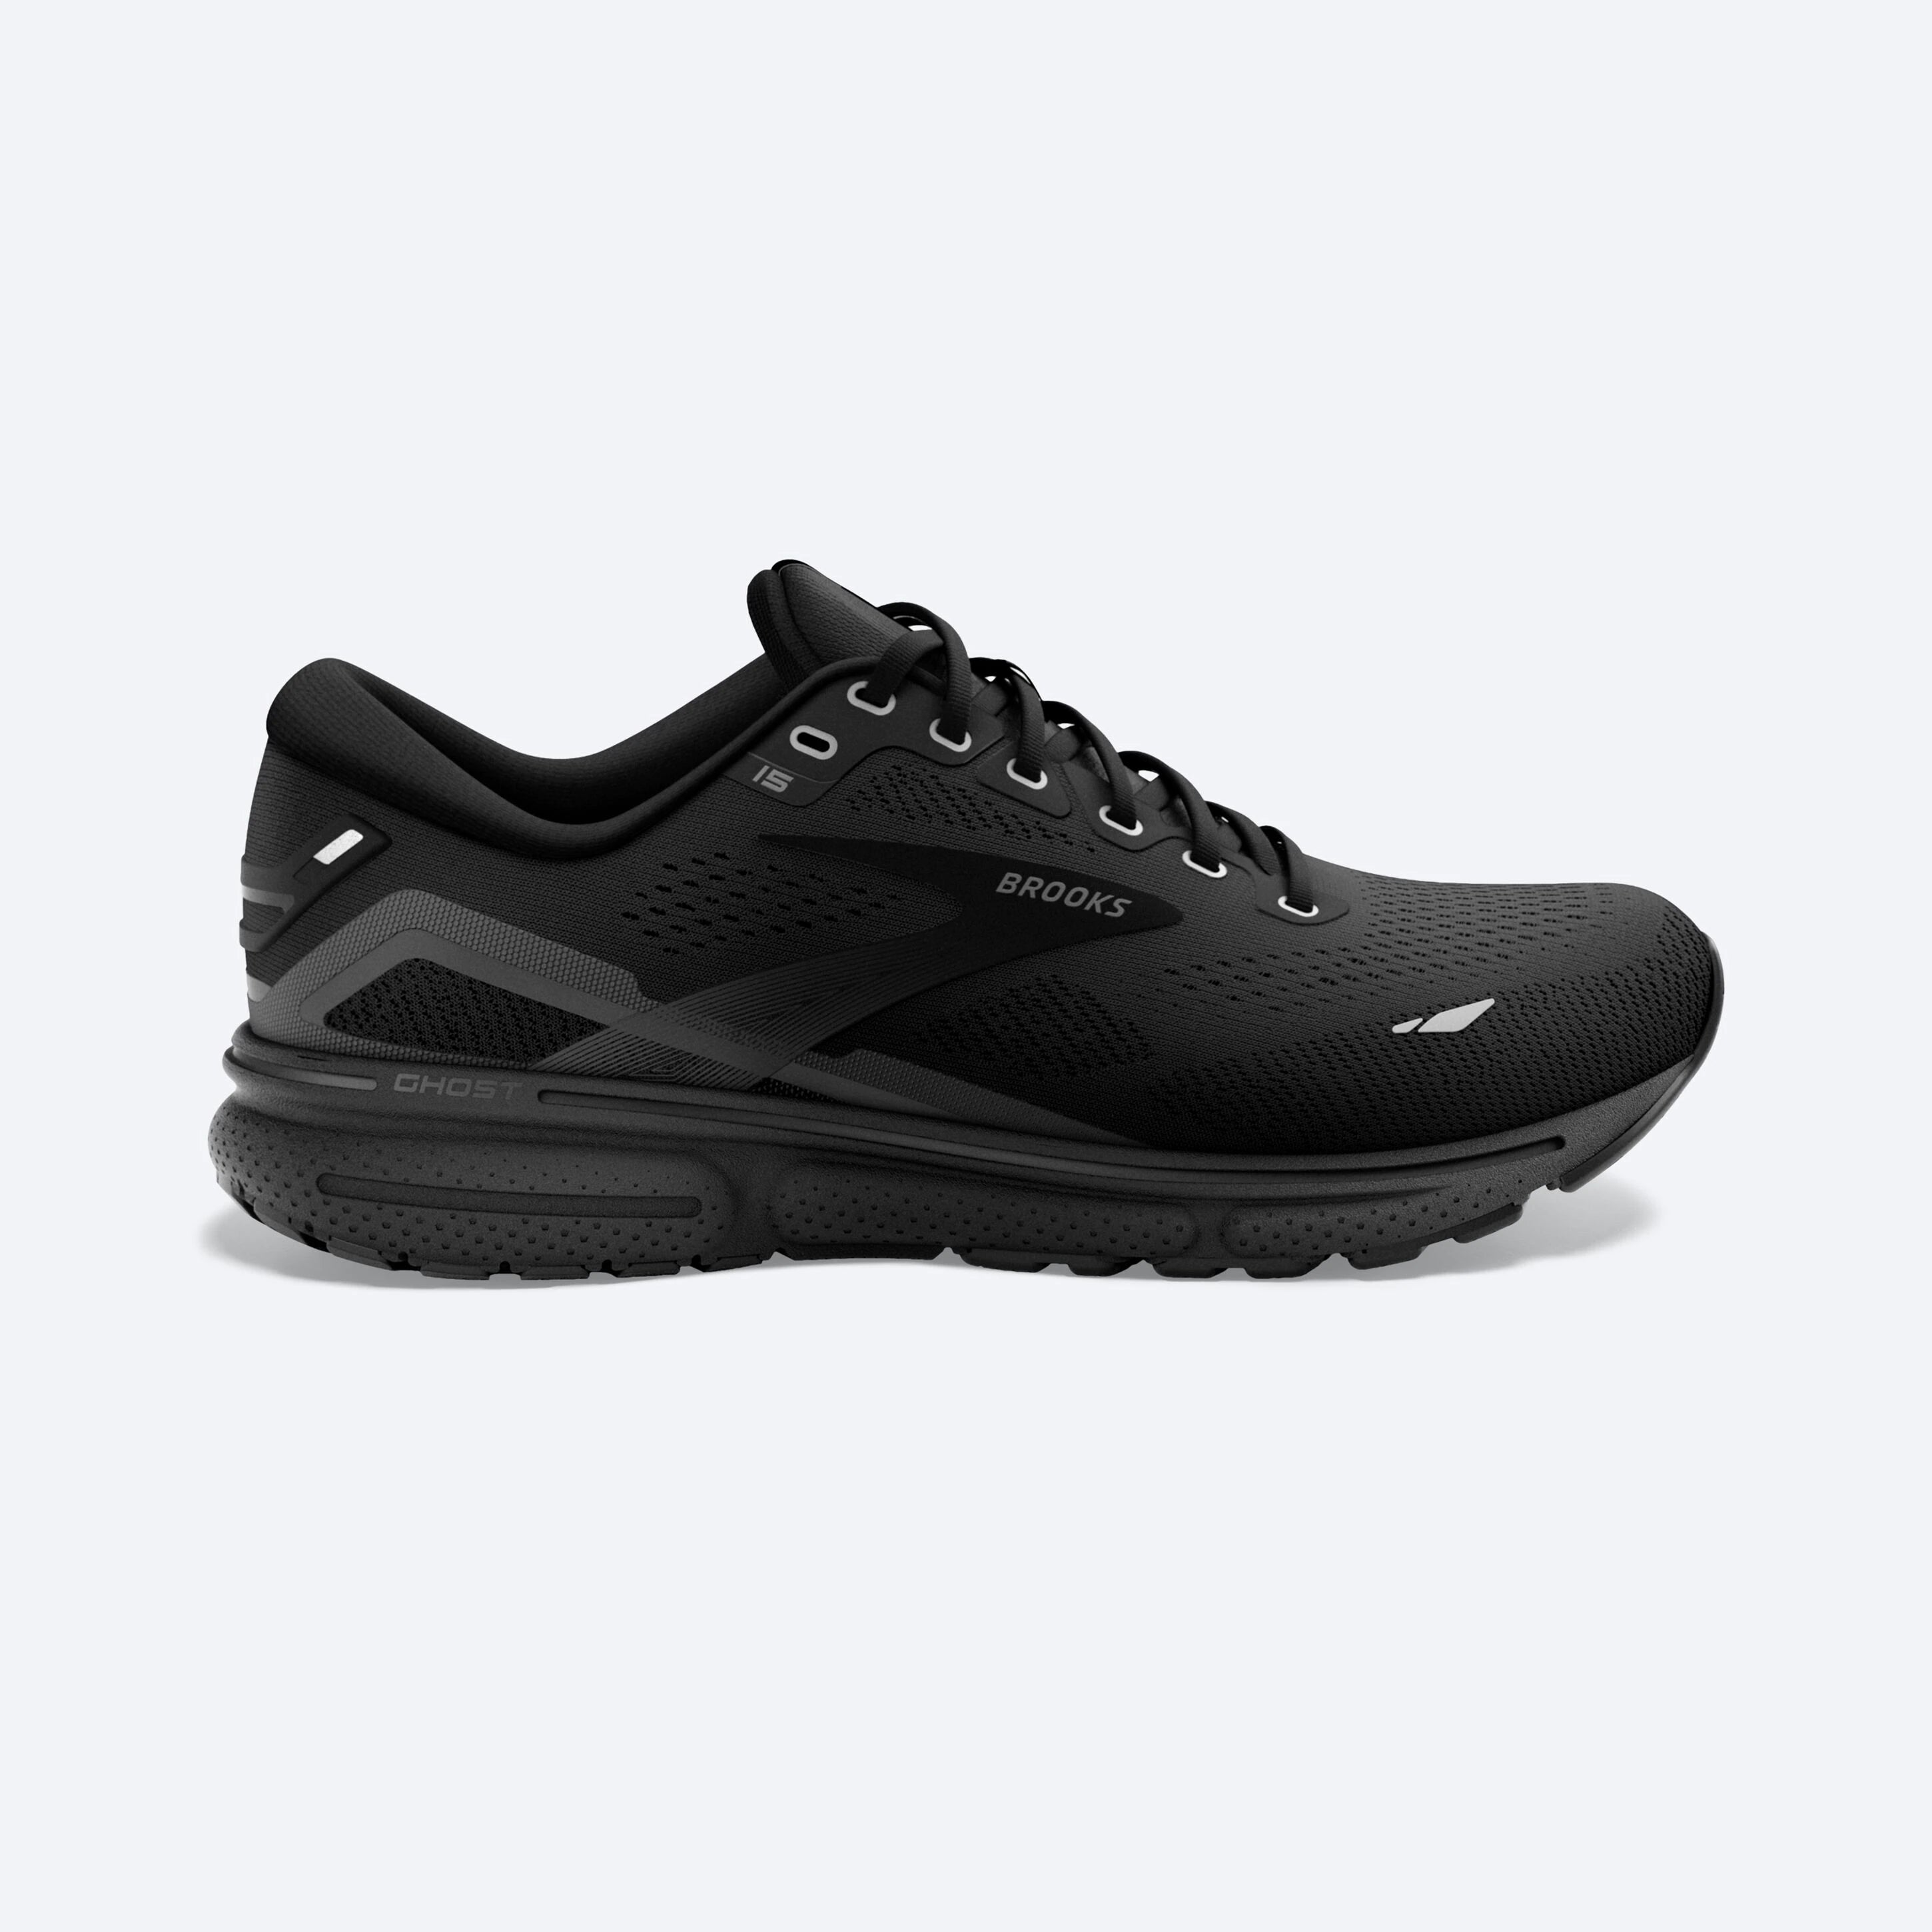 Lateral view of the Women's Ghost 15 by Brooks in the color all black